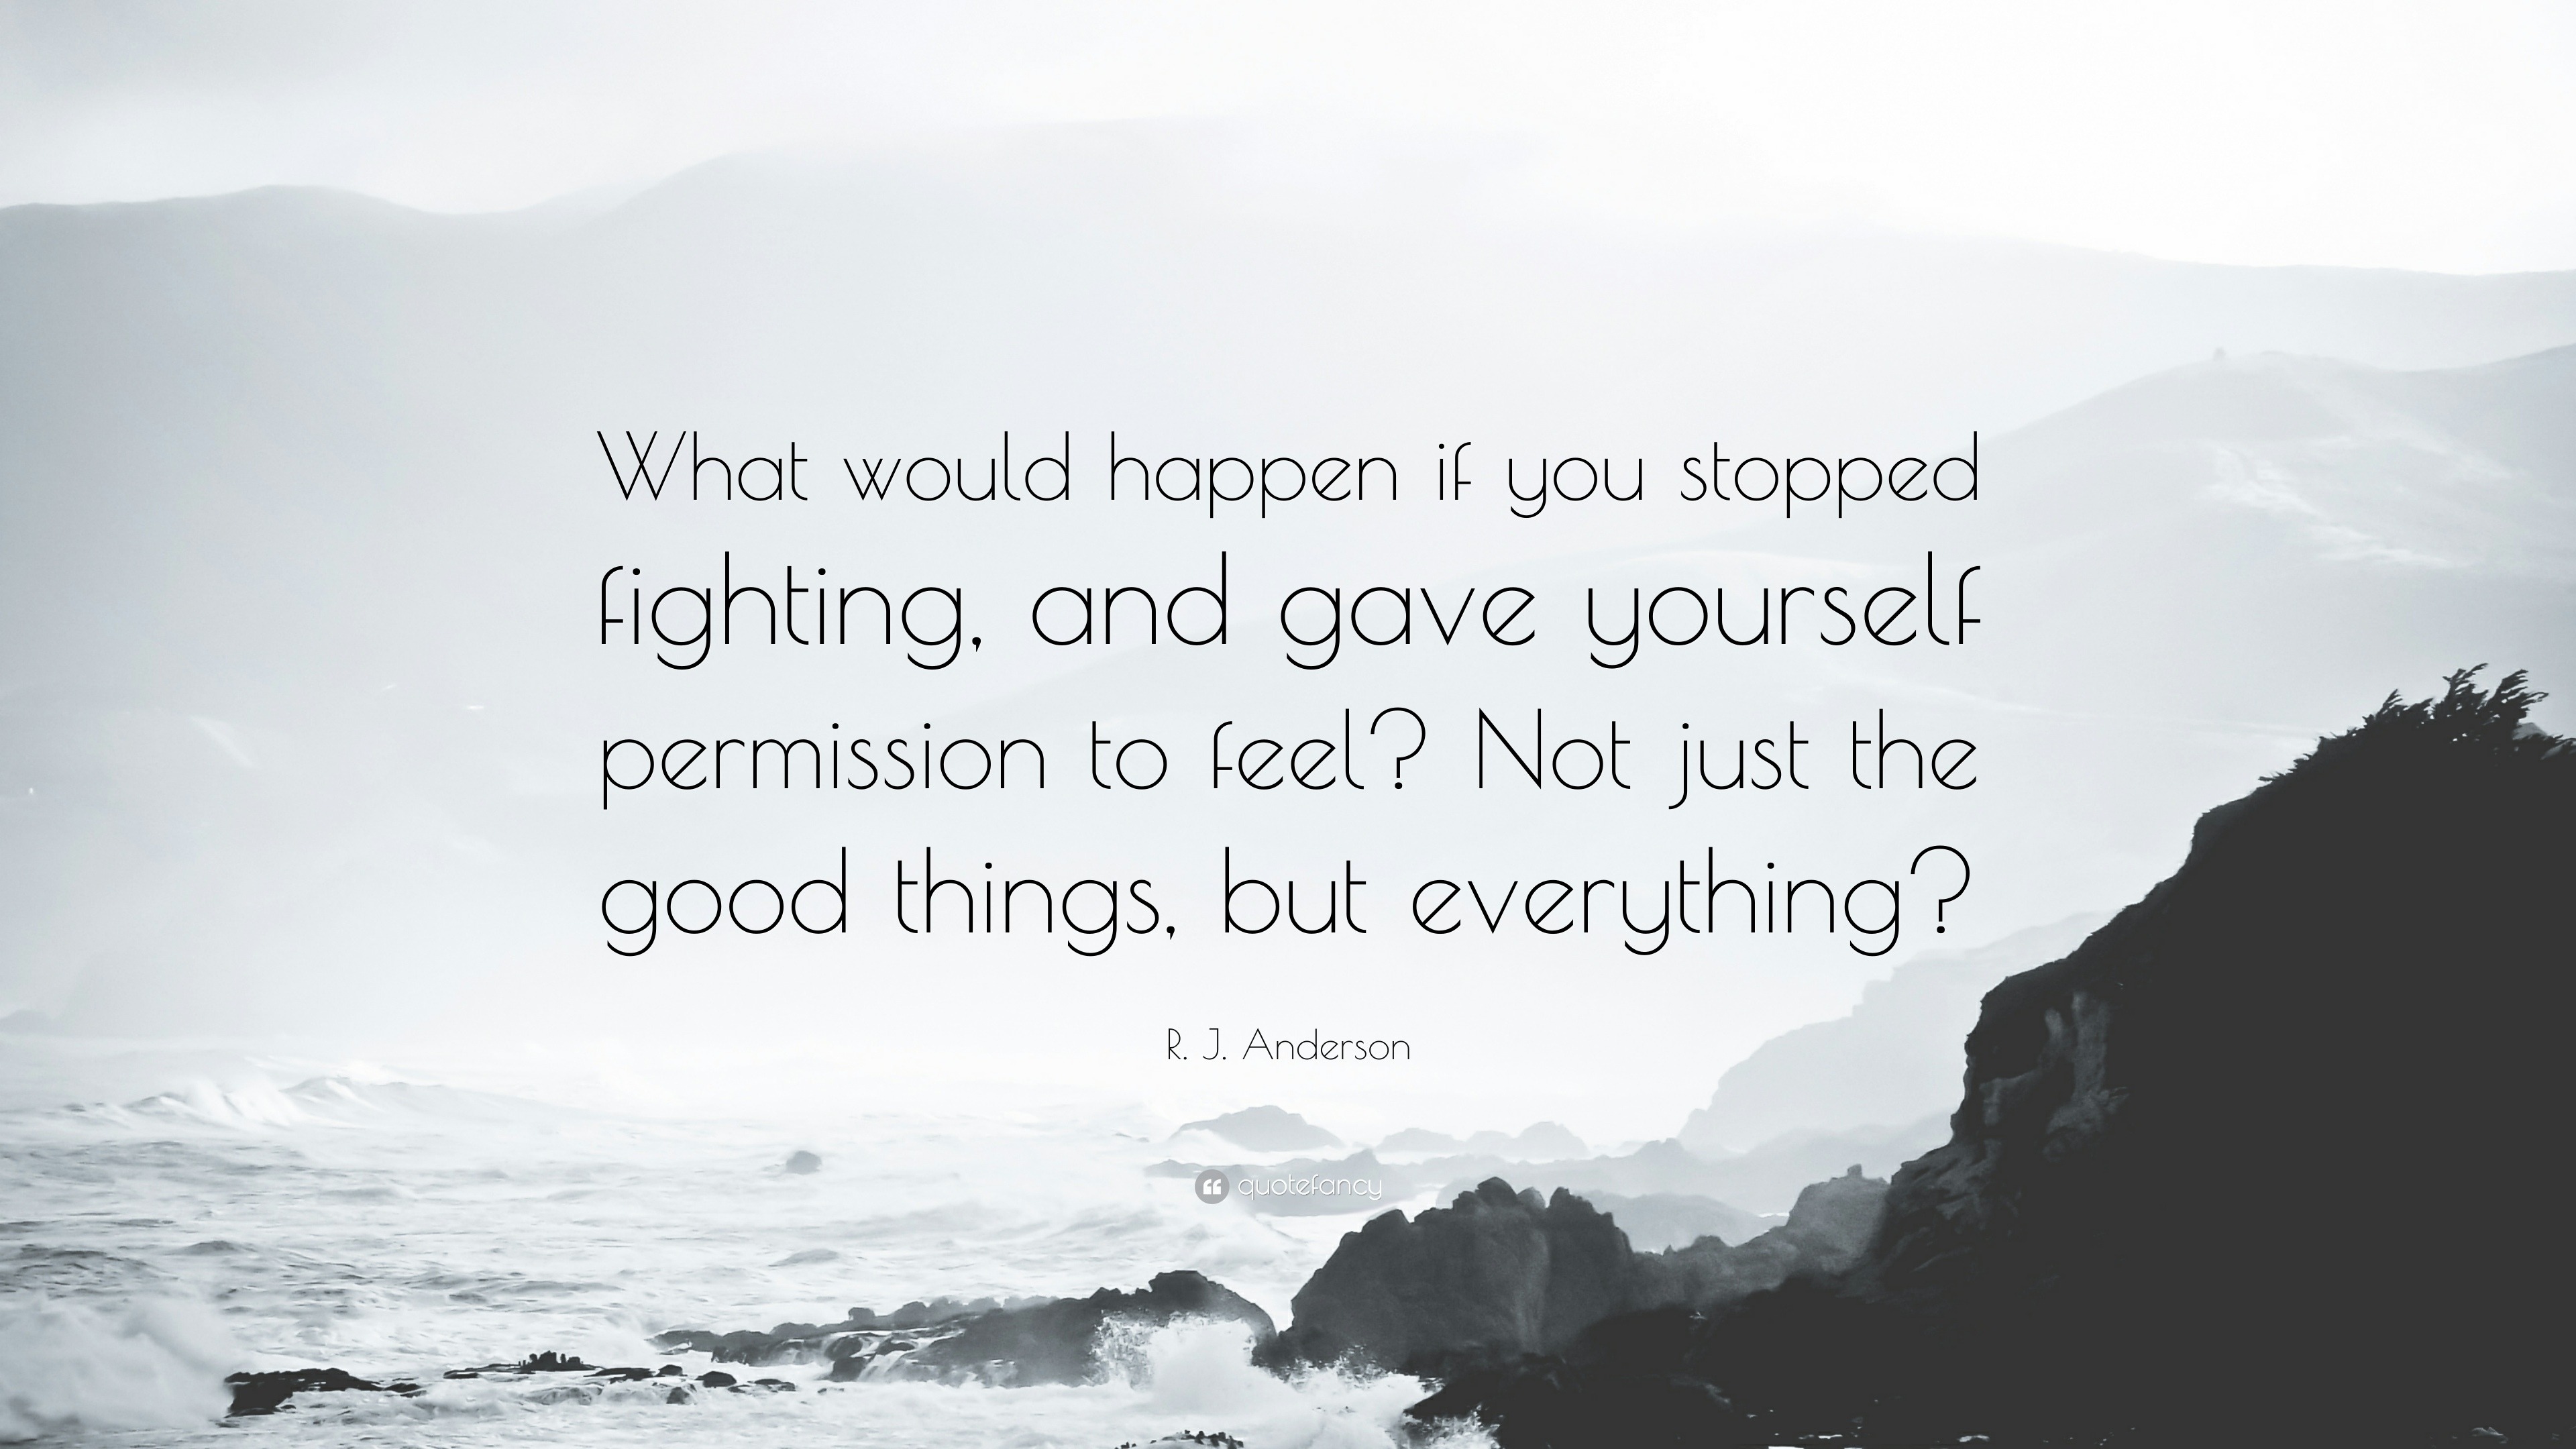 What Would Happen If You Stopped Time?